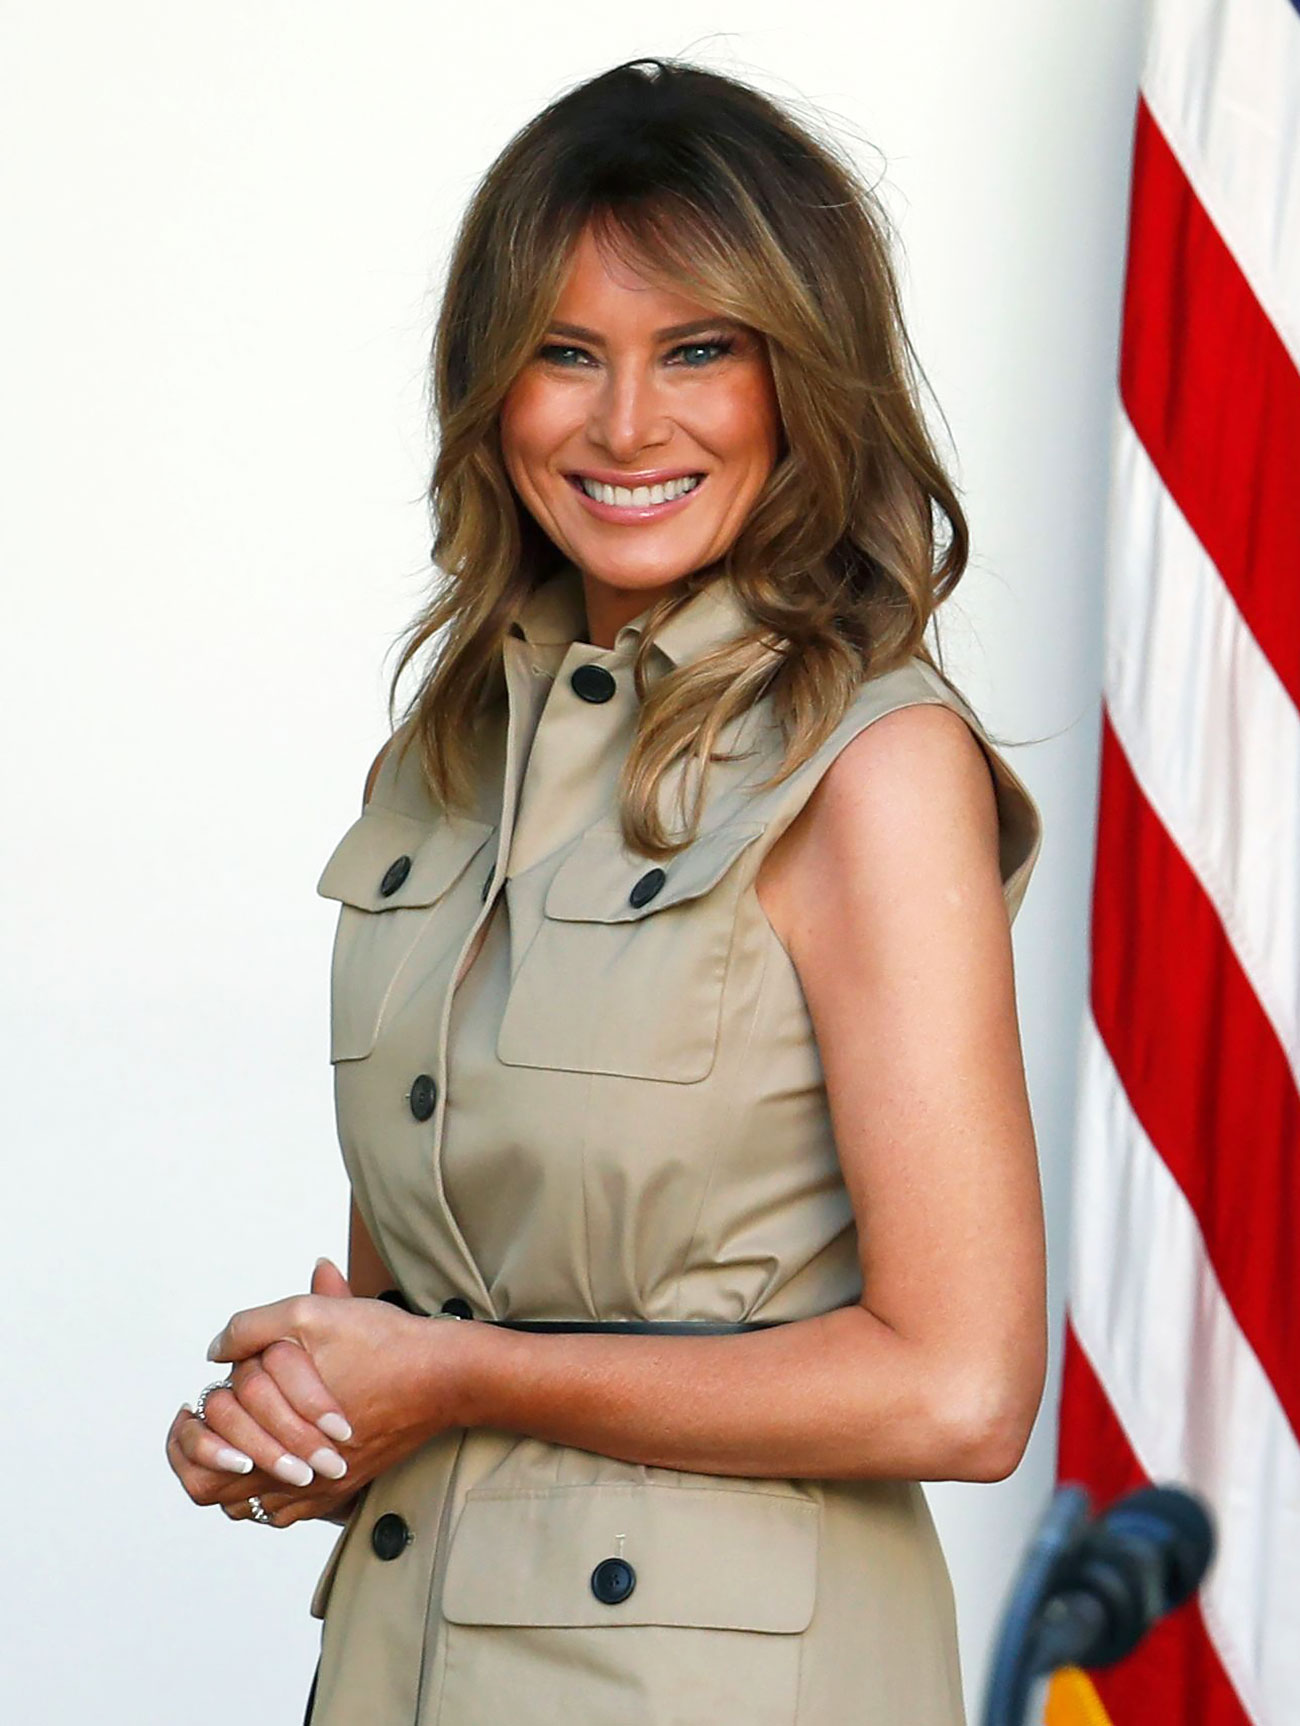 How much does Melania Trump's jewelry cost? - Quora